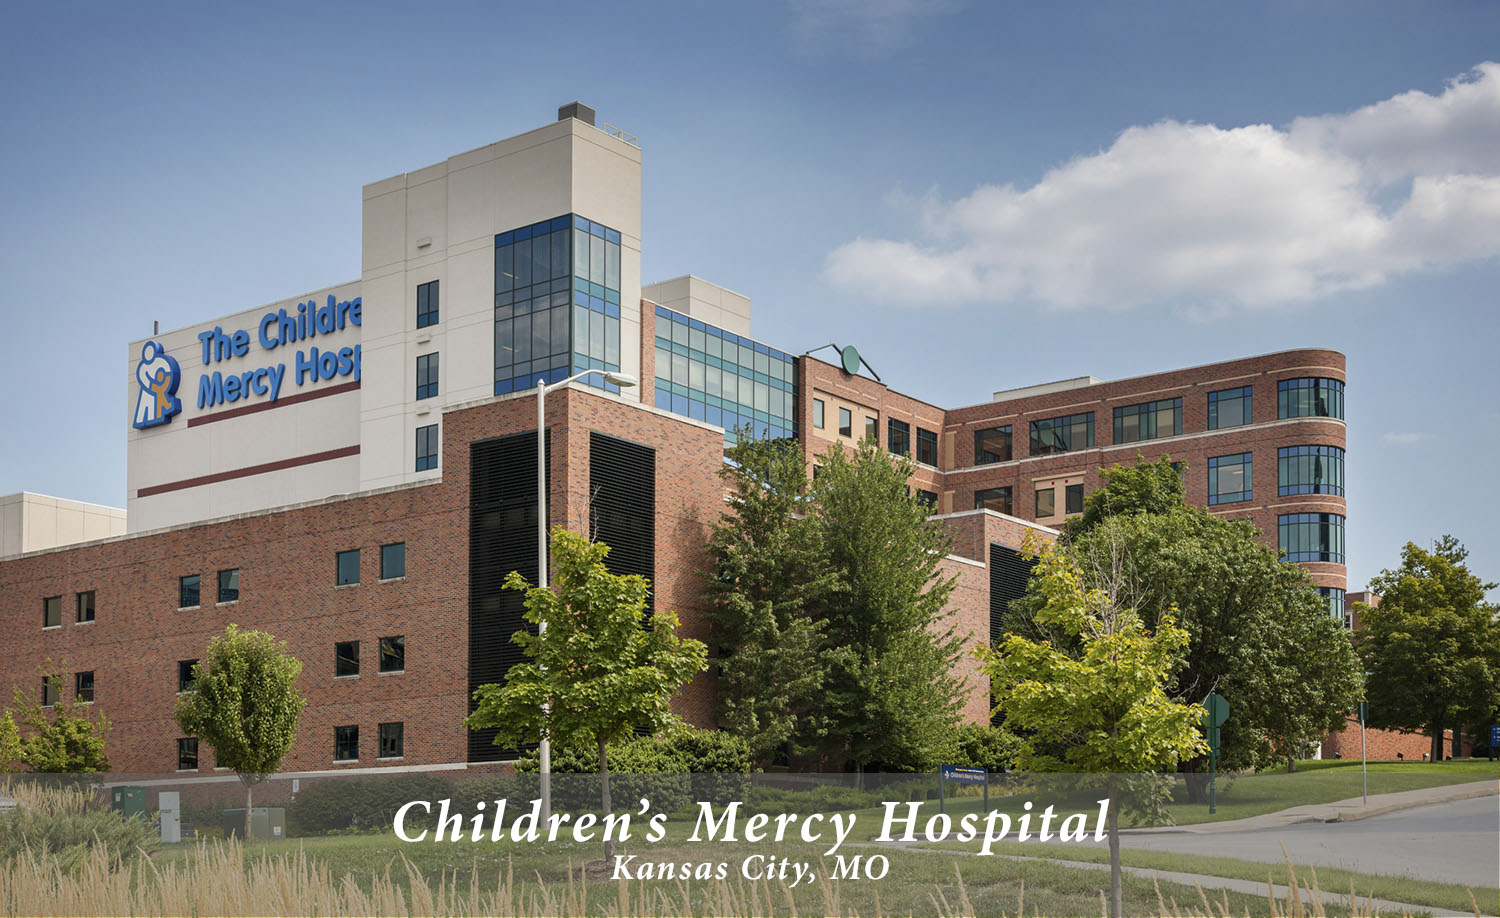 Children's Mercy Hospital with Text.jpg